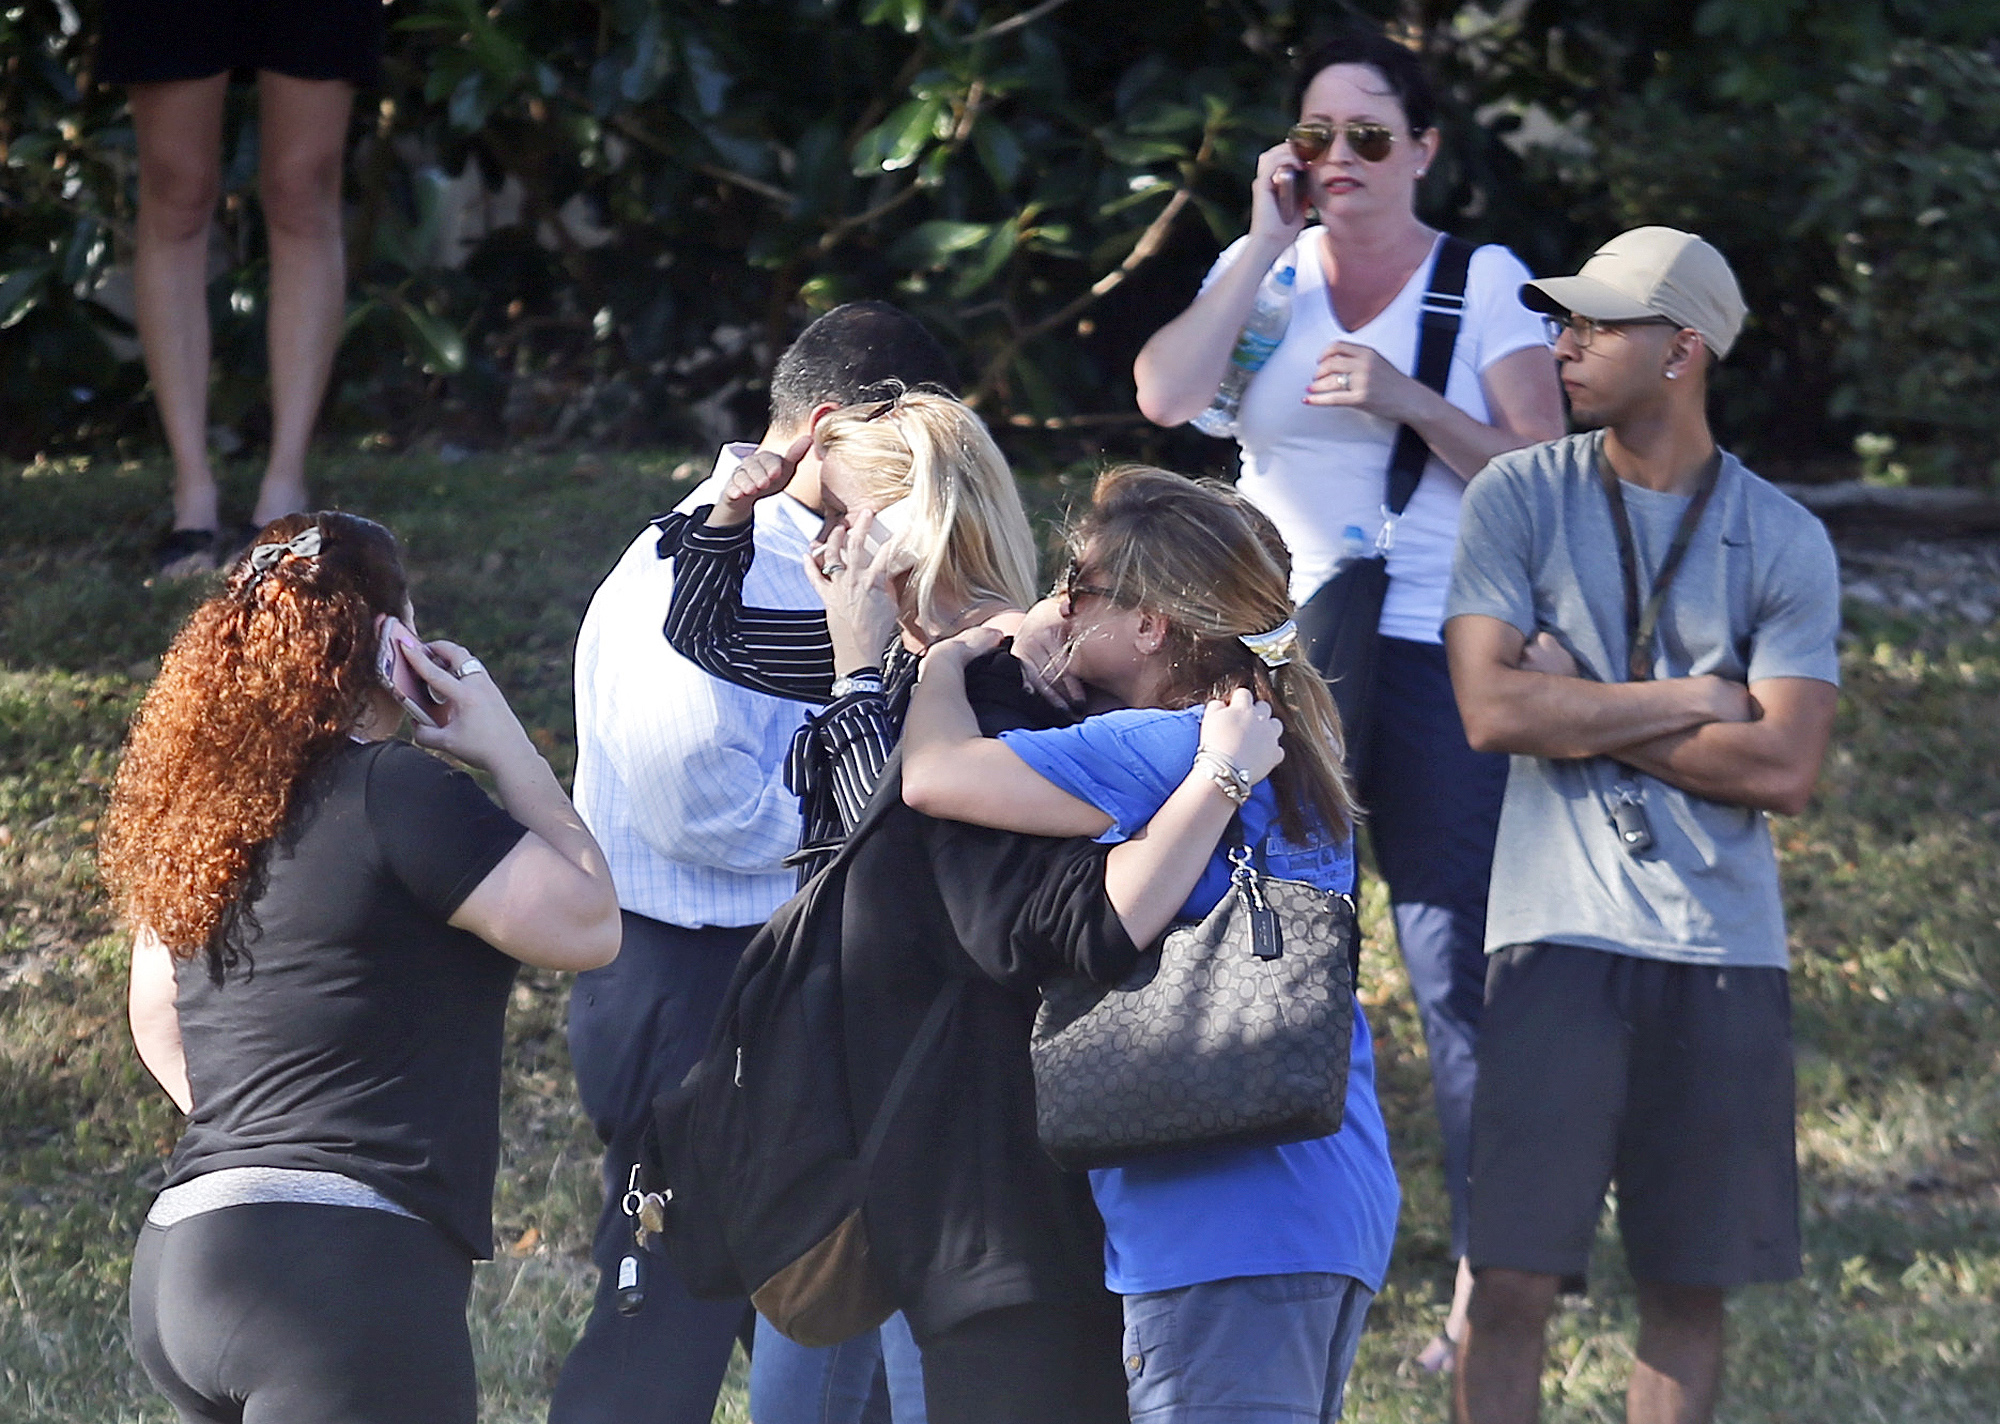 PHOTO: Anxious family members wait for news of students as two people embrace, Feb. 14, 2018, in Parkland, Fla. 